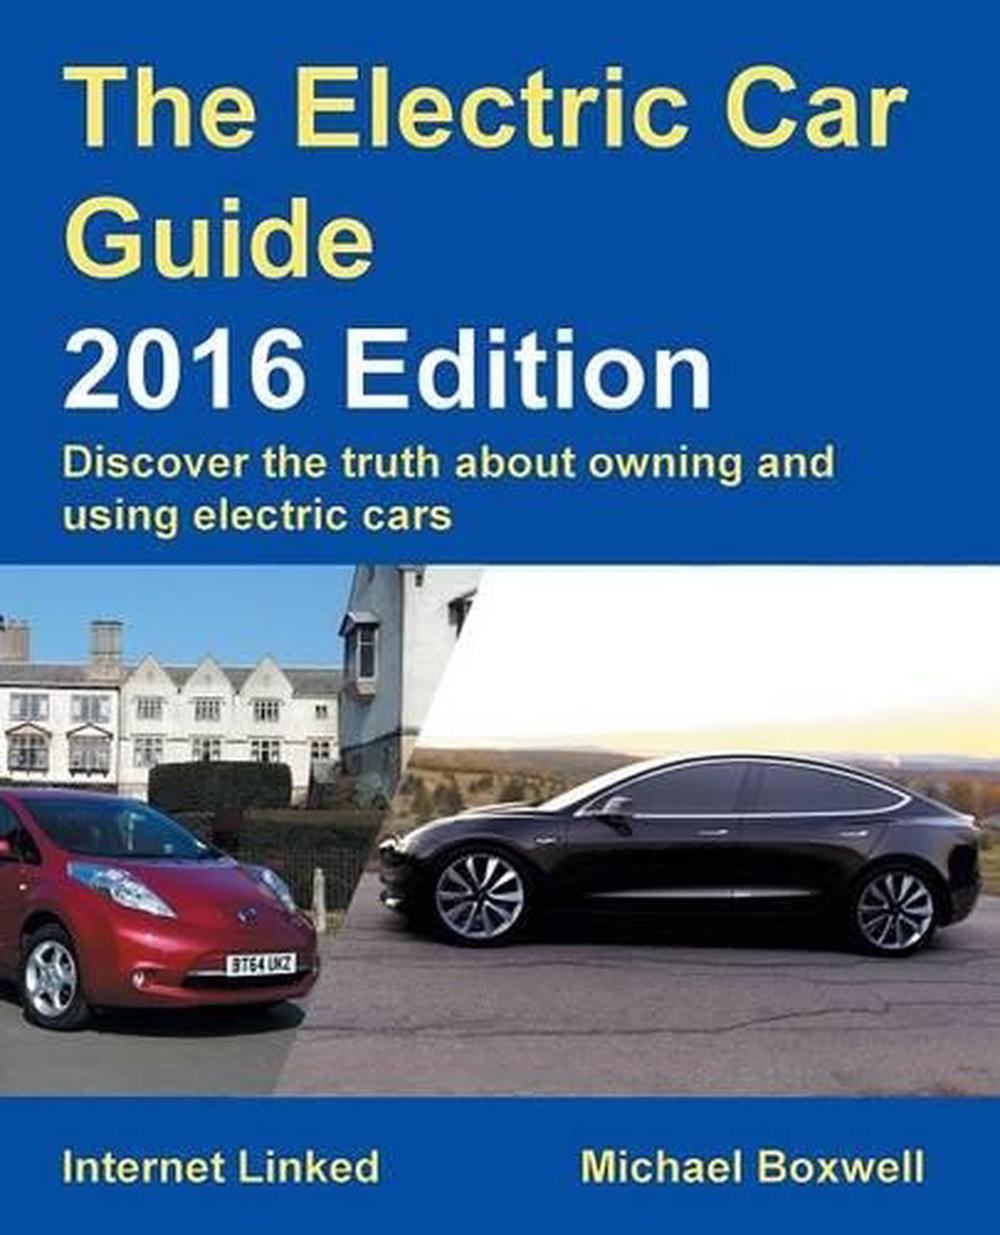 Electric Car Guide 2016 Edition by Michael Boxwell (English) Paperback